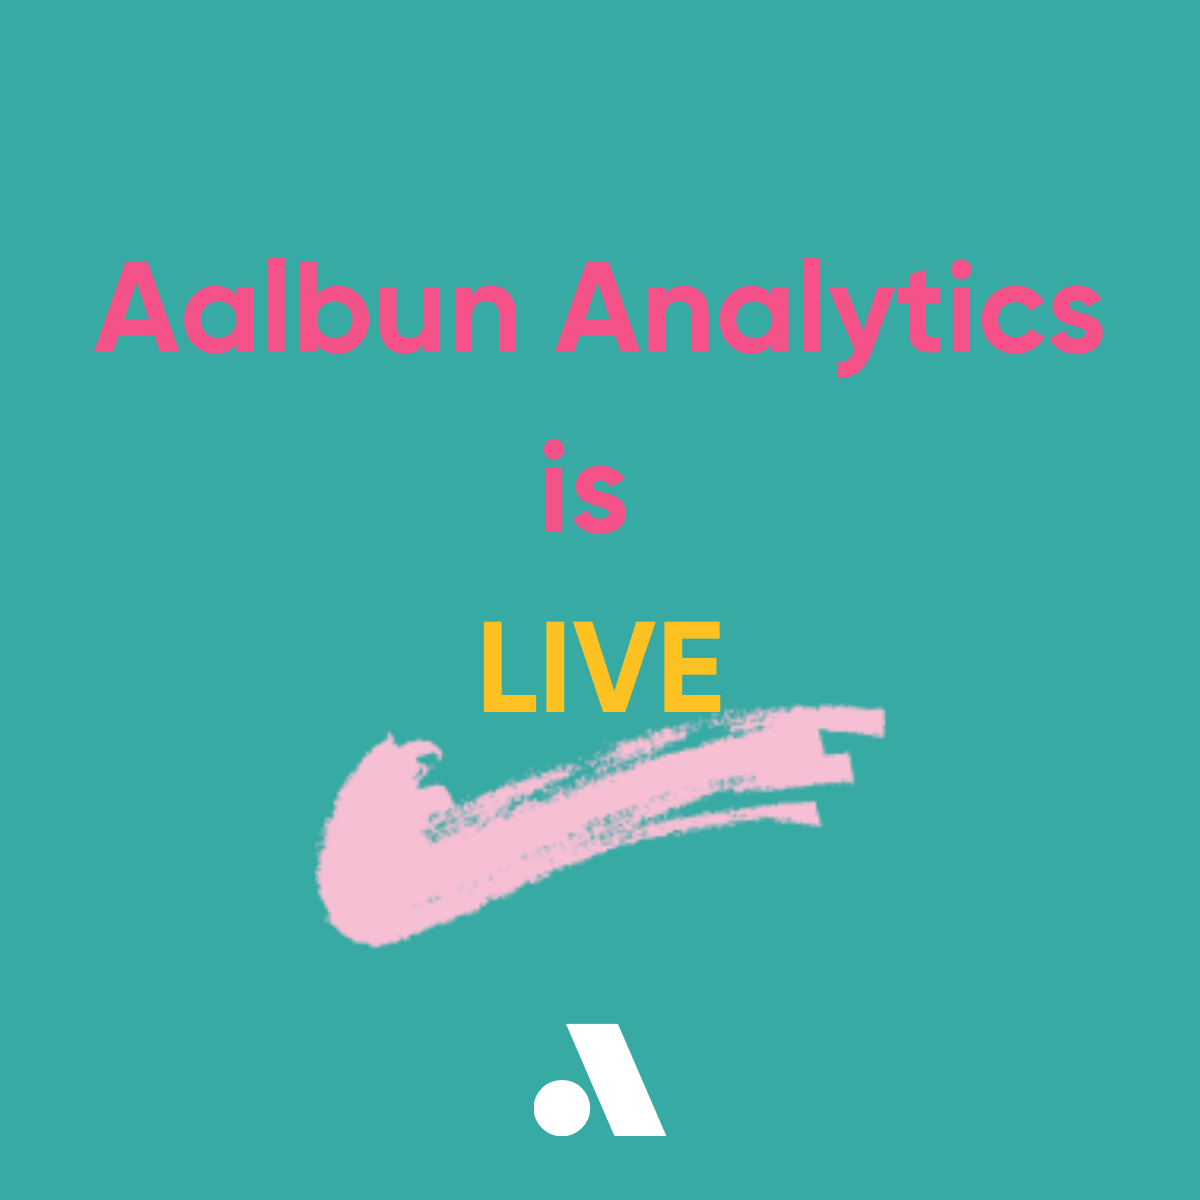 New Aalbun Analytics tool allows innovators to build intelligence using patent, trademark and invention data for every sector